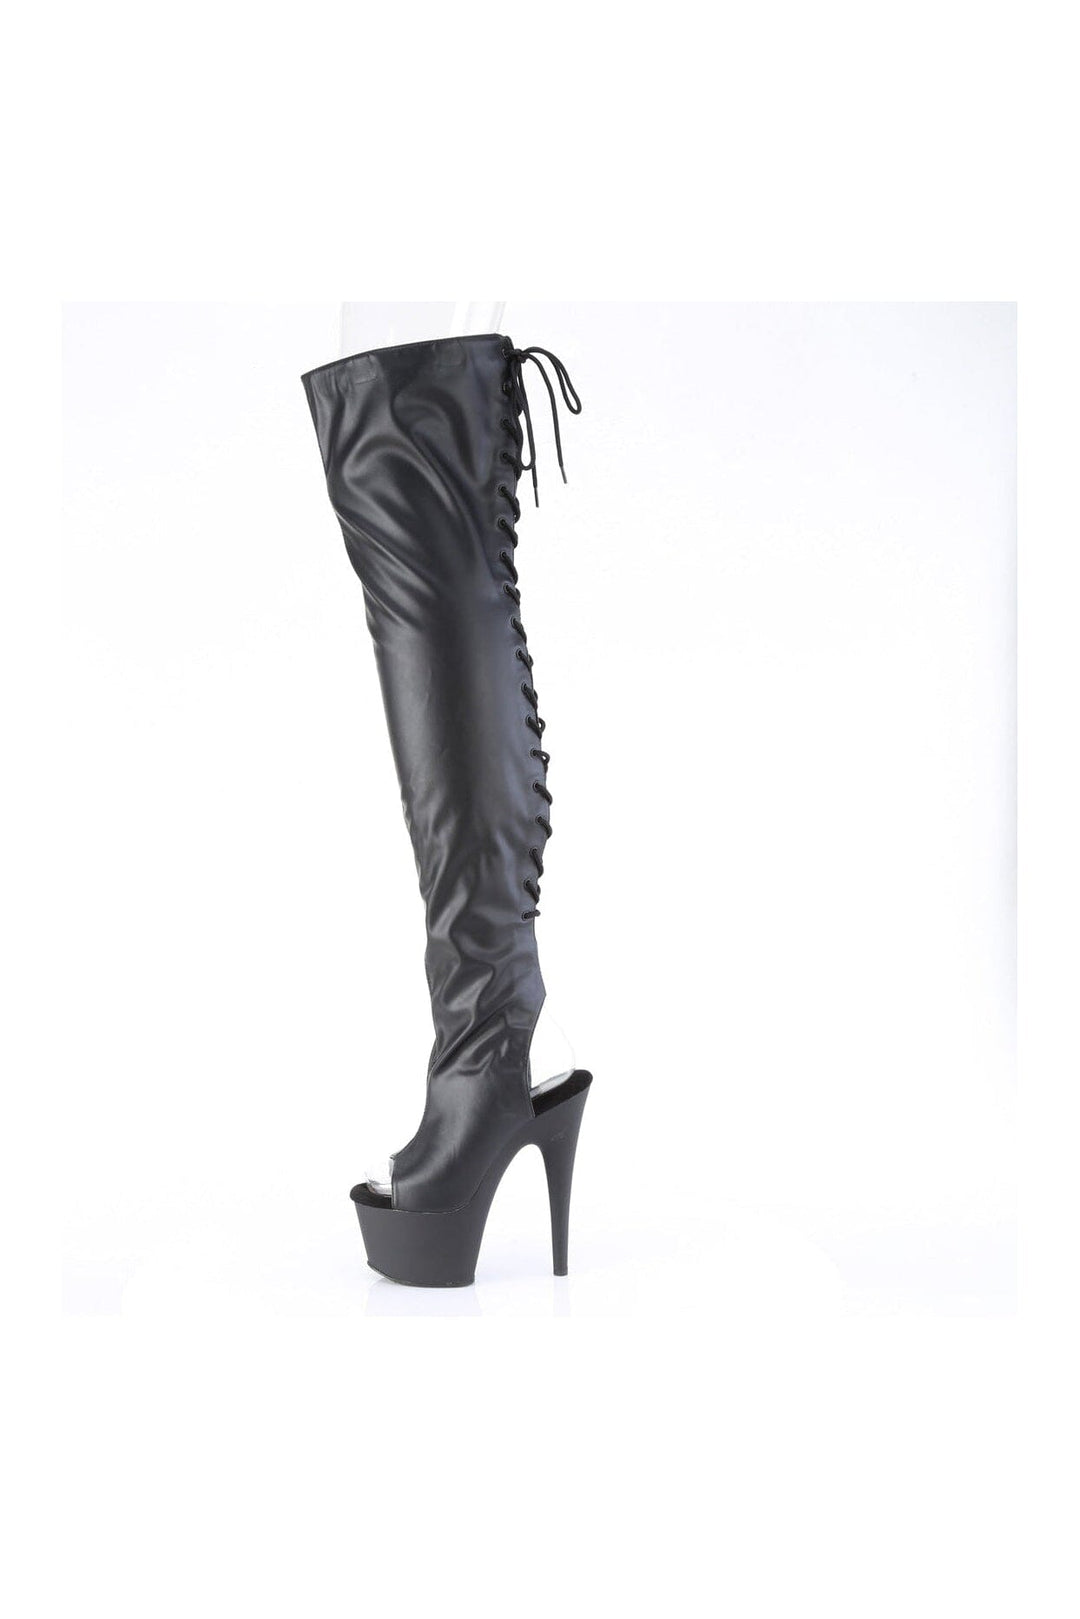 ADORE-3017 Black Faux Leather Thigh Boot-Thigh Boots-Pleaser-SEXYSHOES.COM